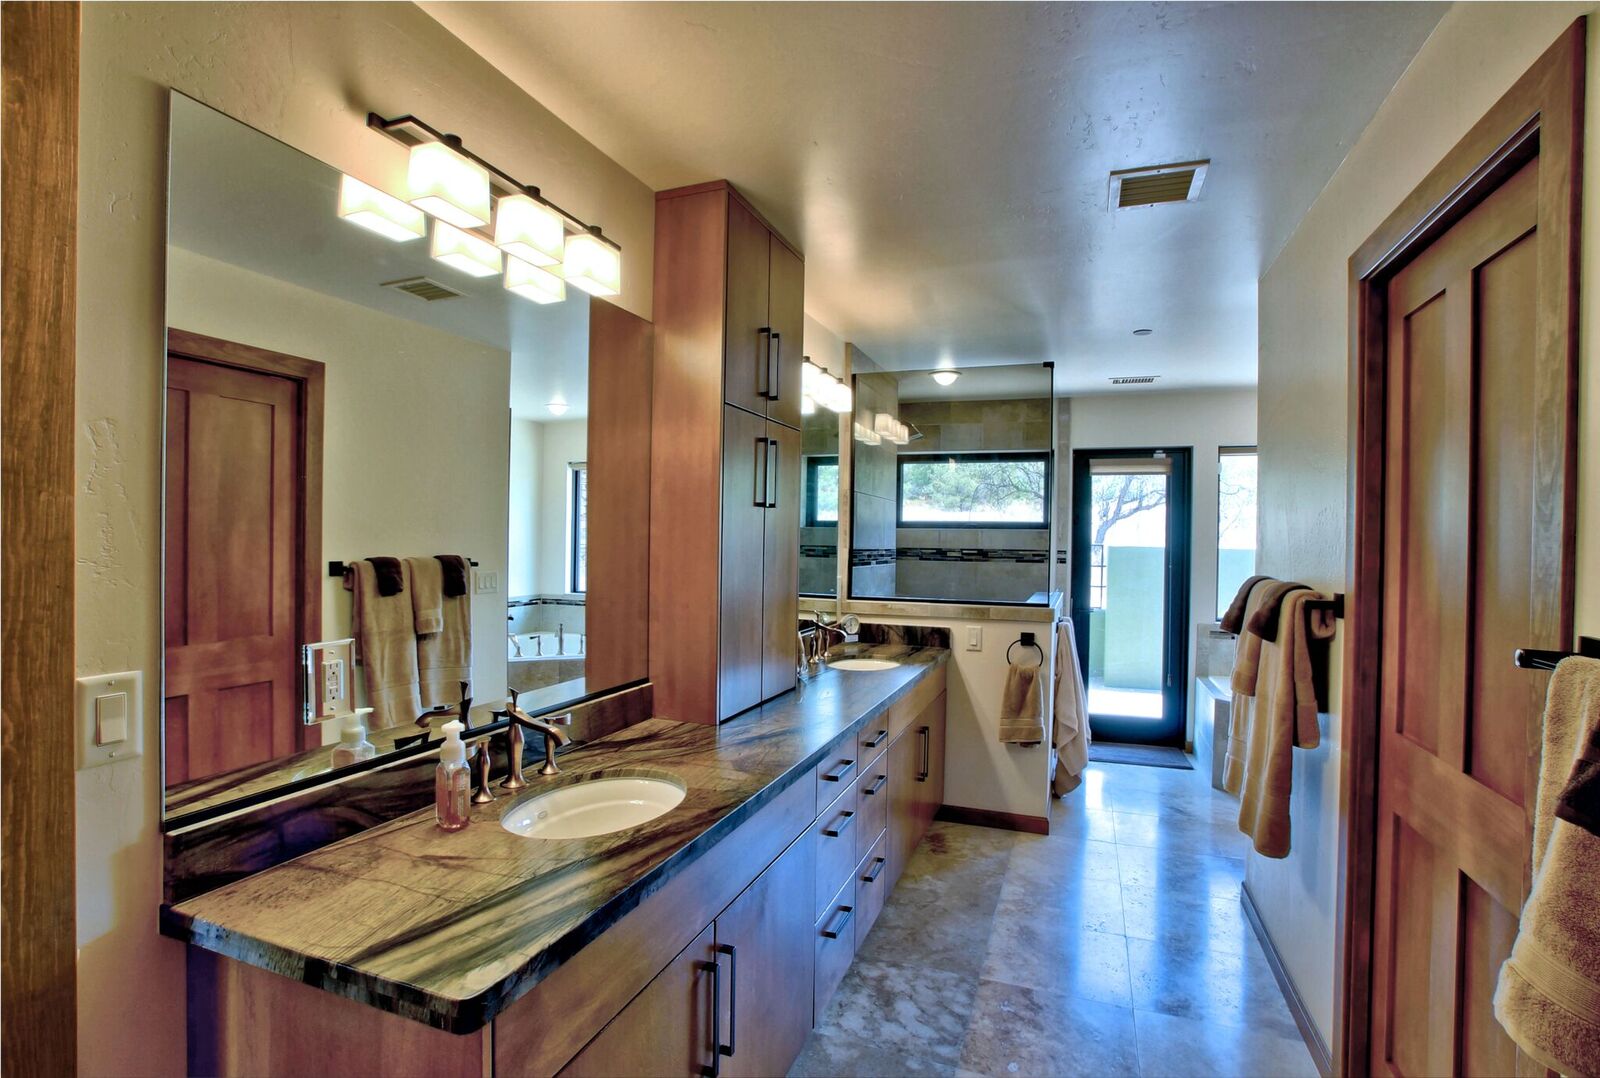 A large bathroom with a sink and counter.